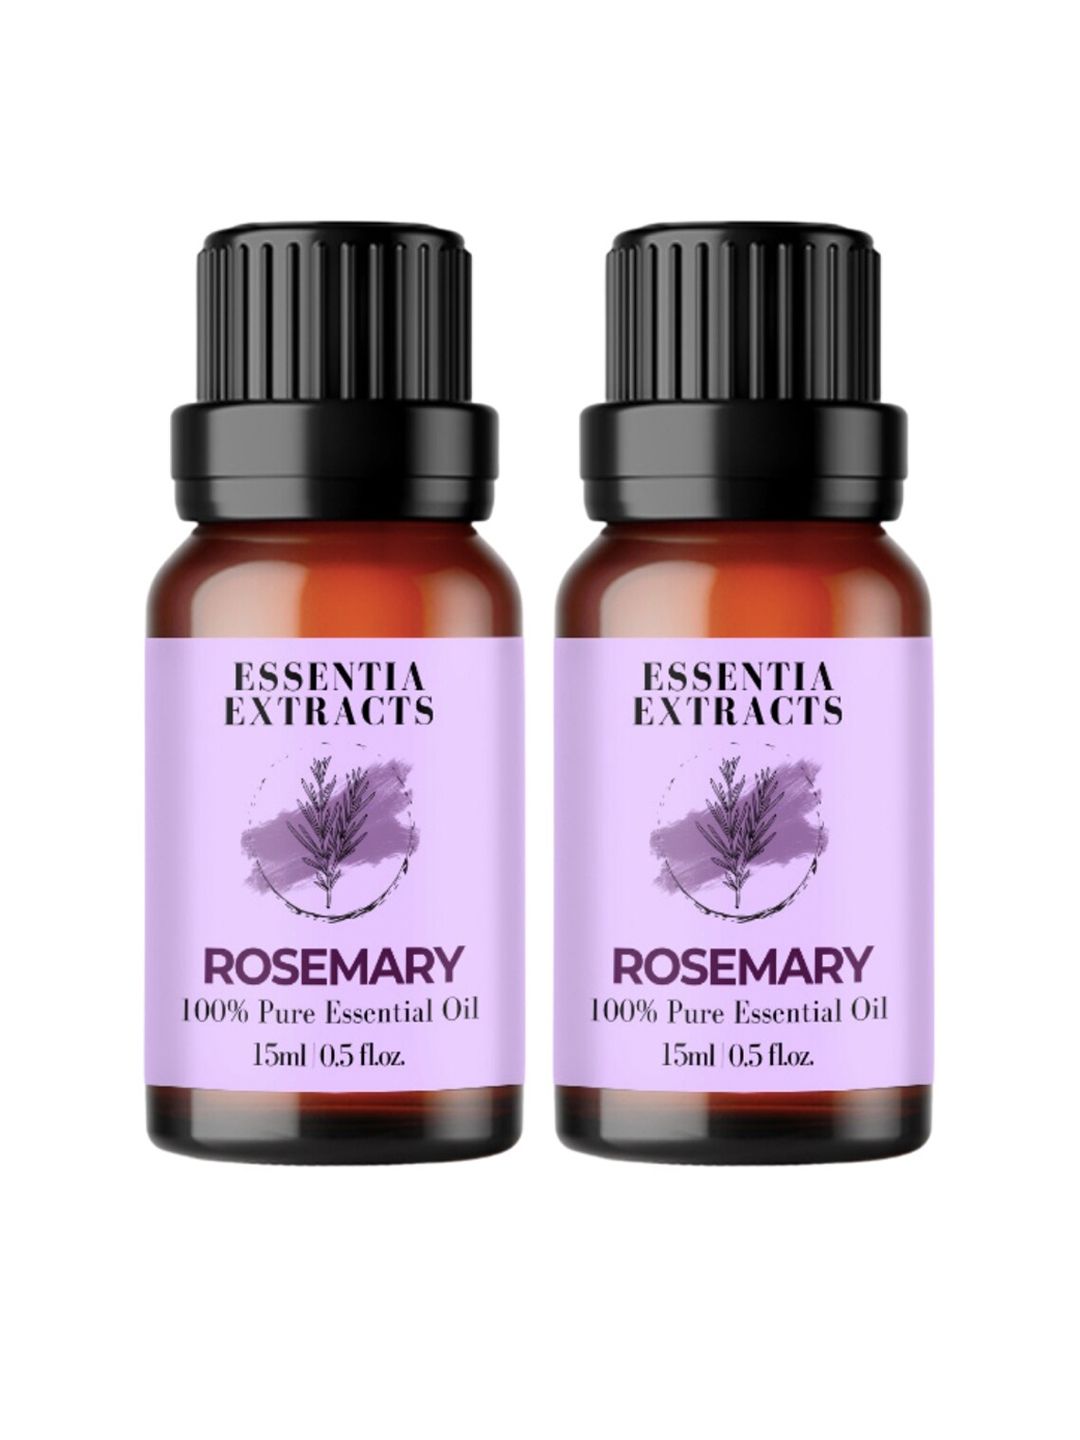 ESSENTIA EXTRACTS Combo of 2 Rosemary Essential Oils, 15ml Each Price in India